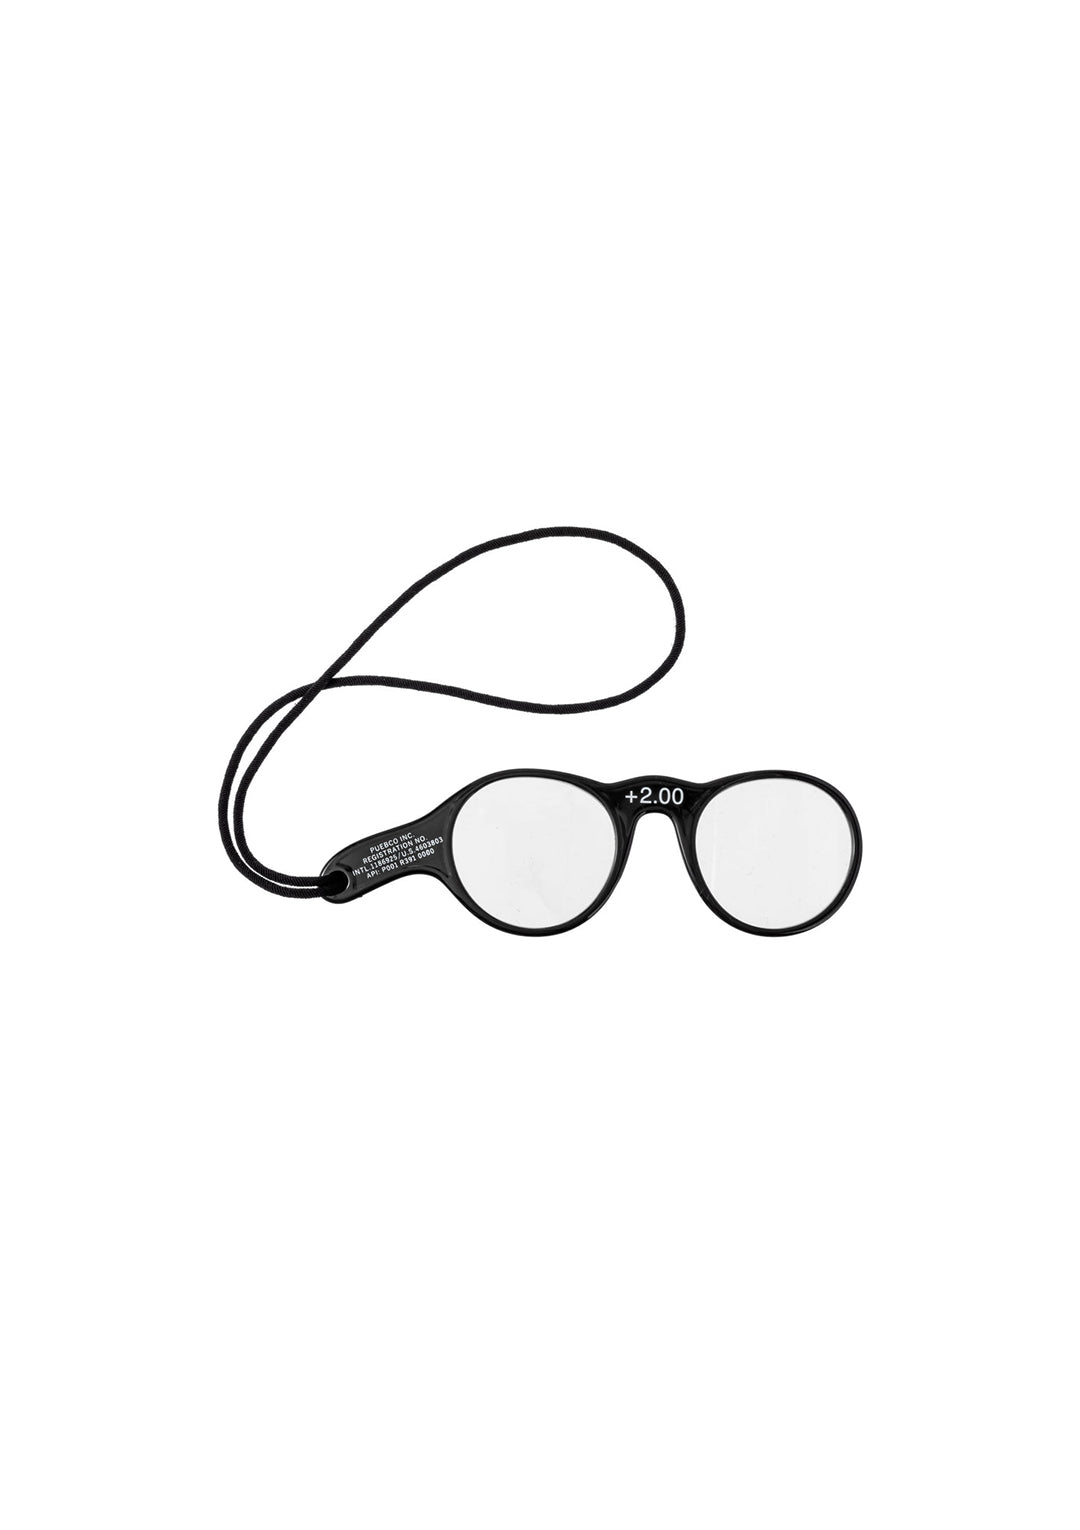 Magnifier with Glasses Code